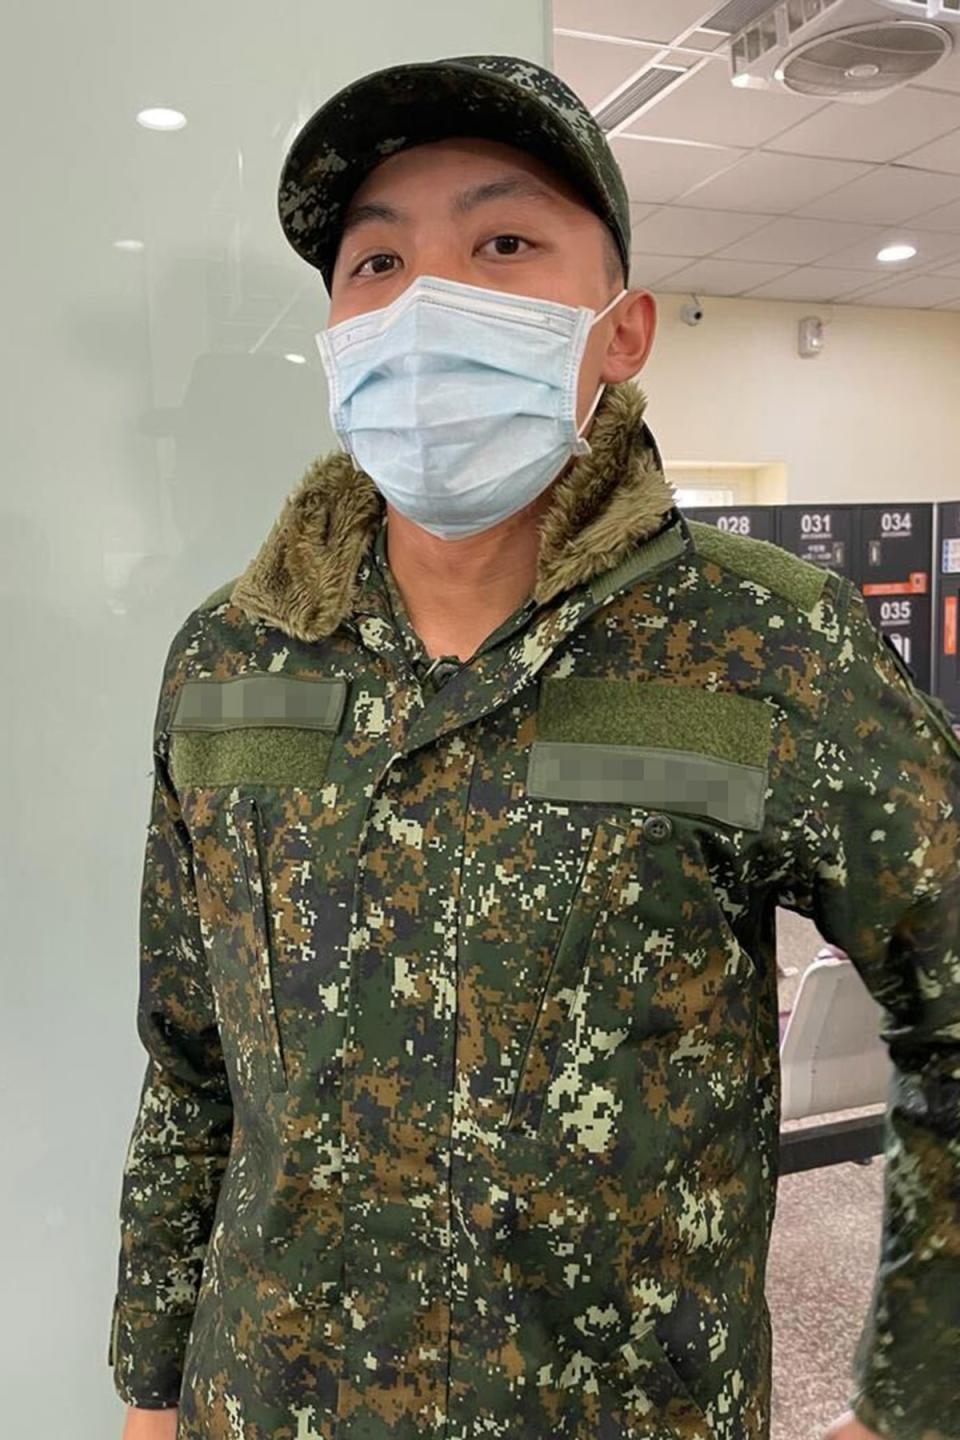 Lee, a 30-year-old army sergeant, has family in China, but he says this will not affect his resolve to defend Taiwan (Kim Sengupta/The Independent)